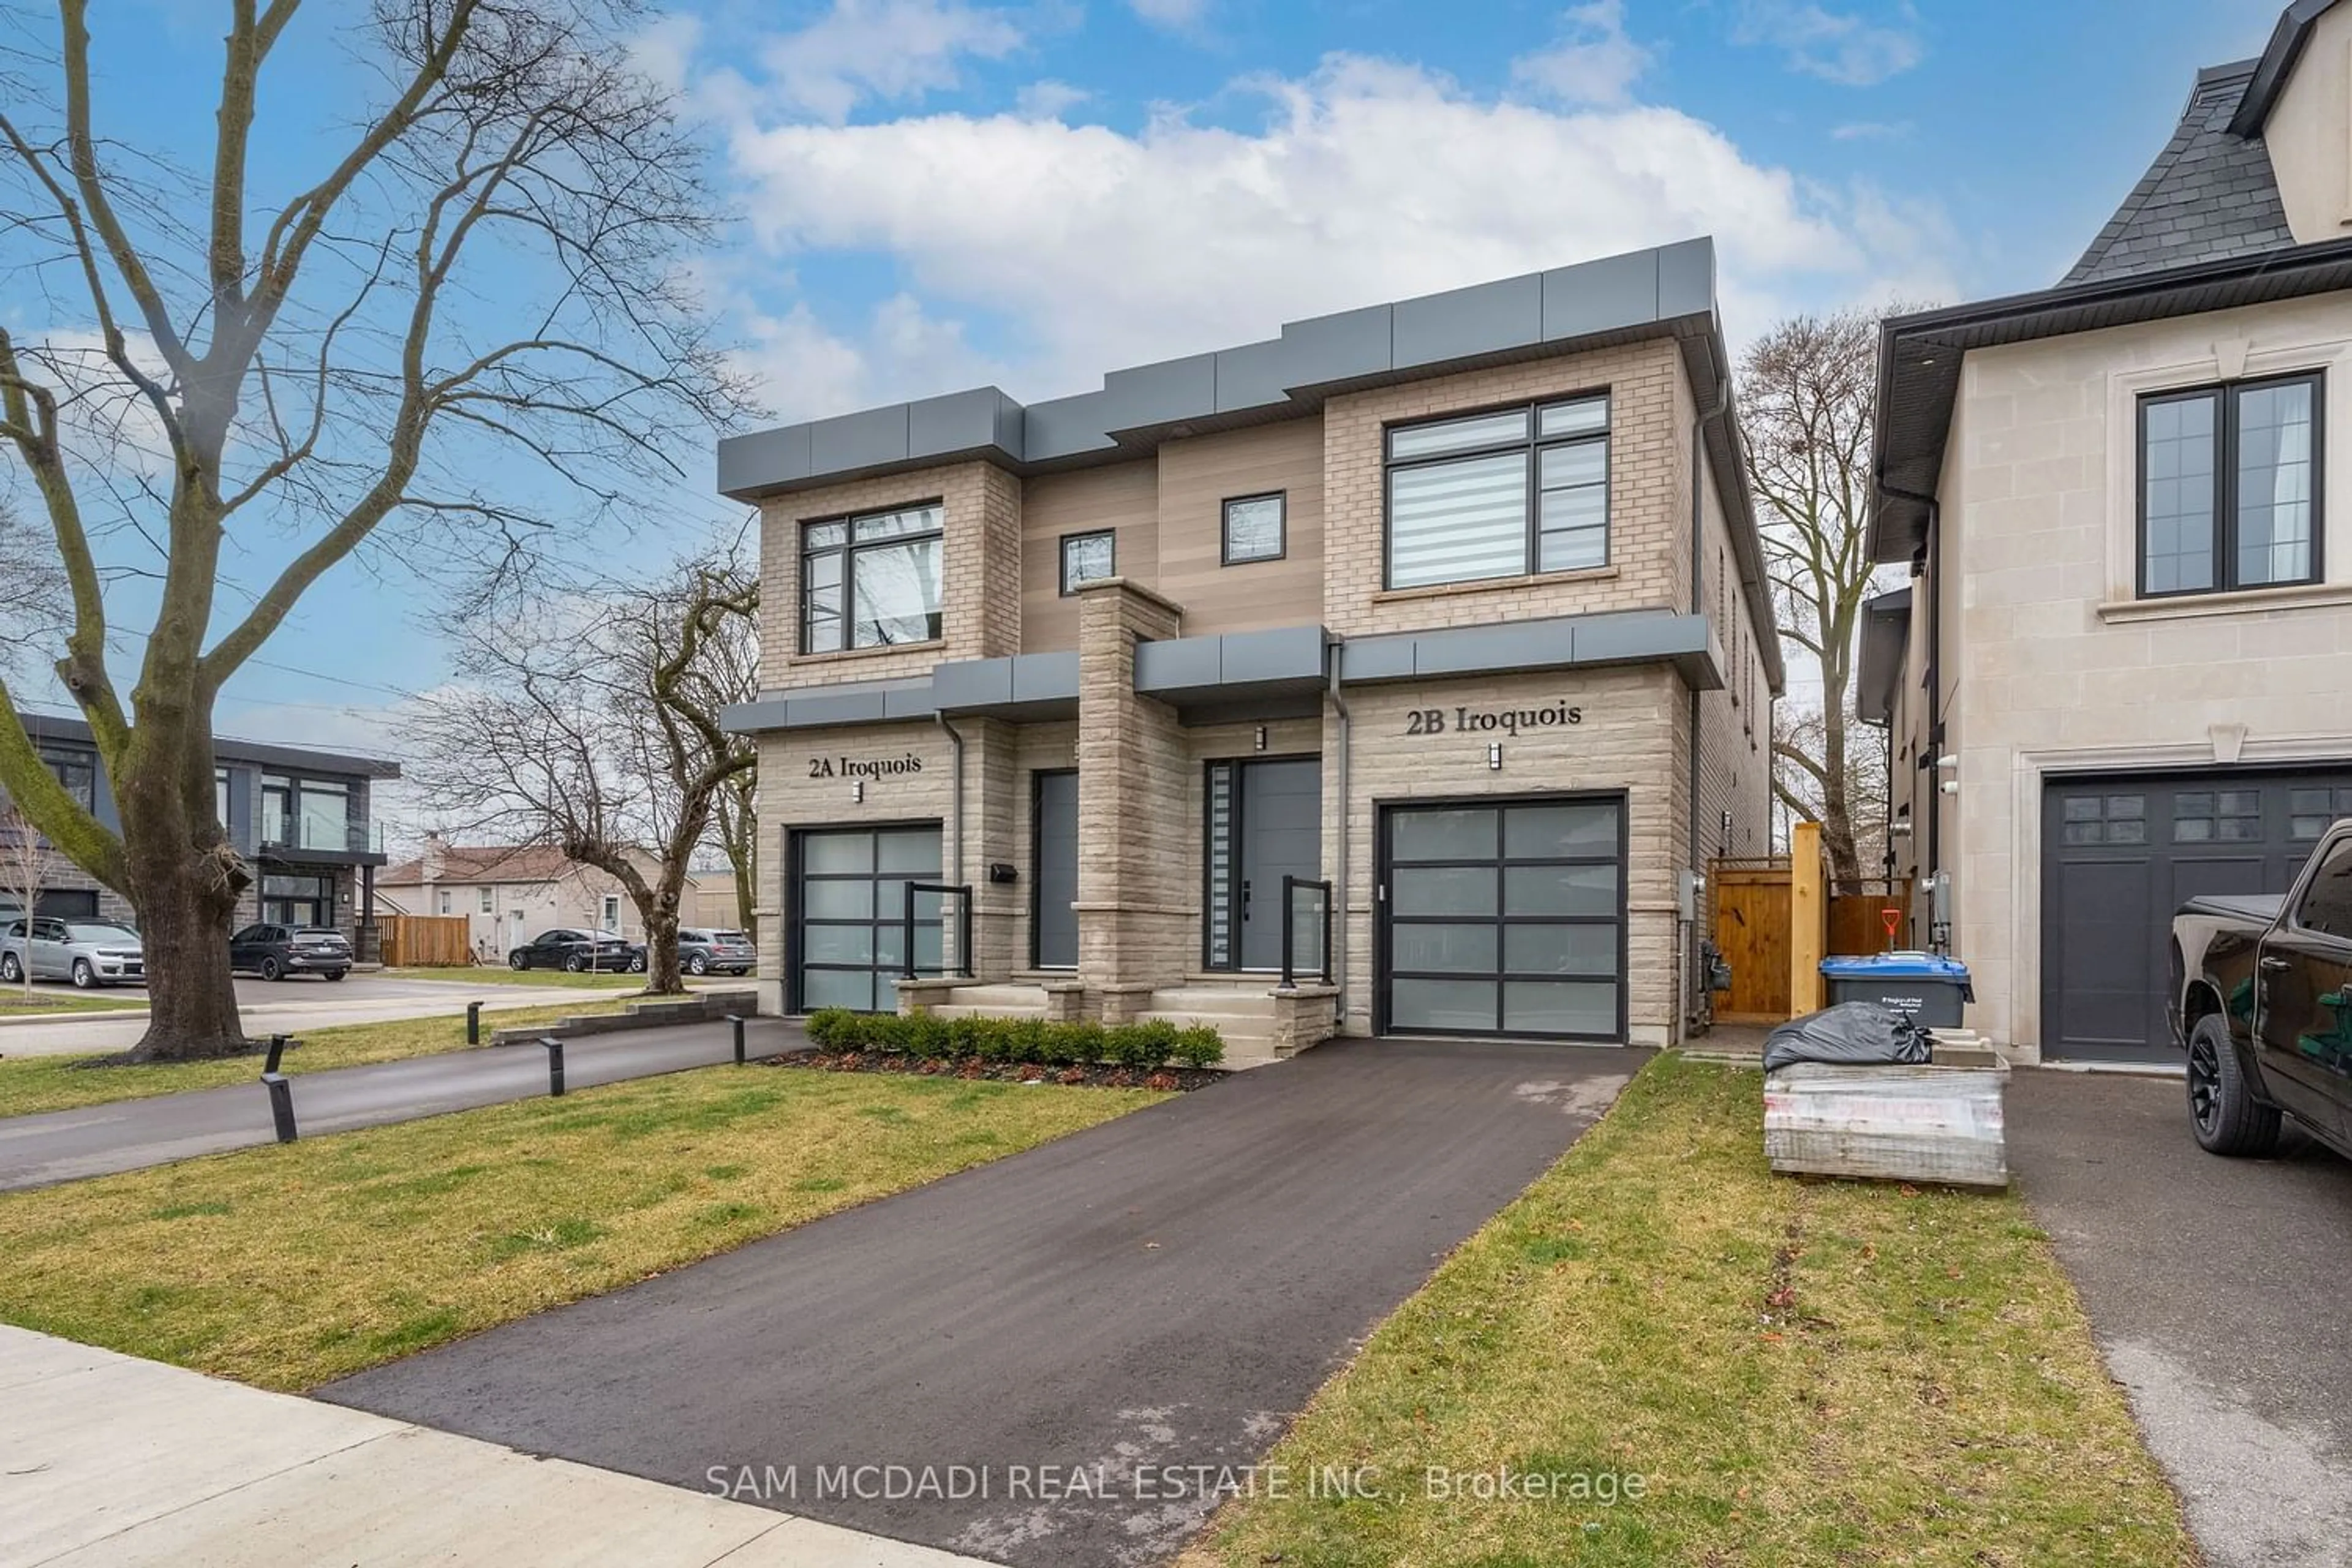 Home with brick exterior material for 2B Iroquois Ave, Mississauga Ontario L5G 1M6